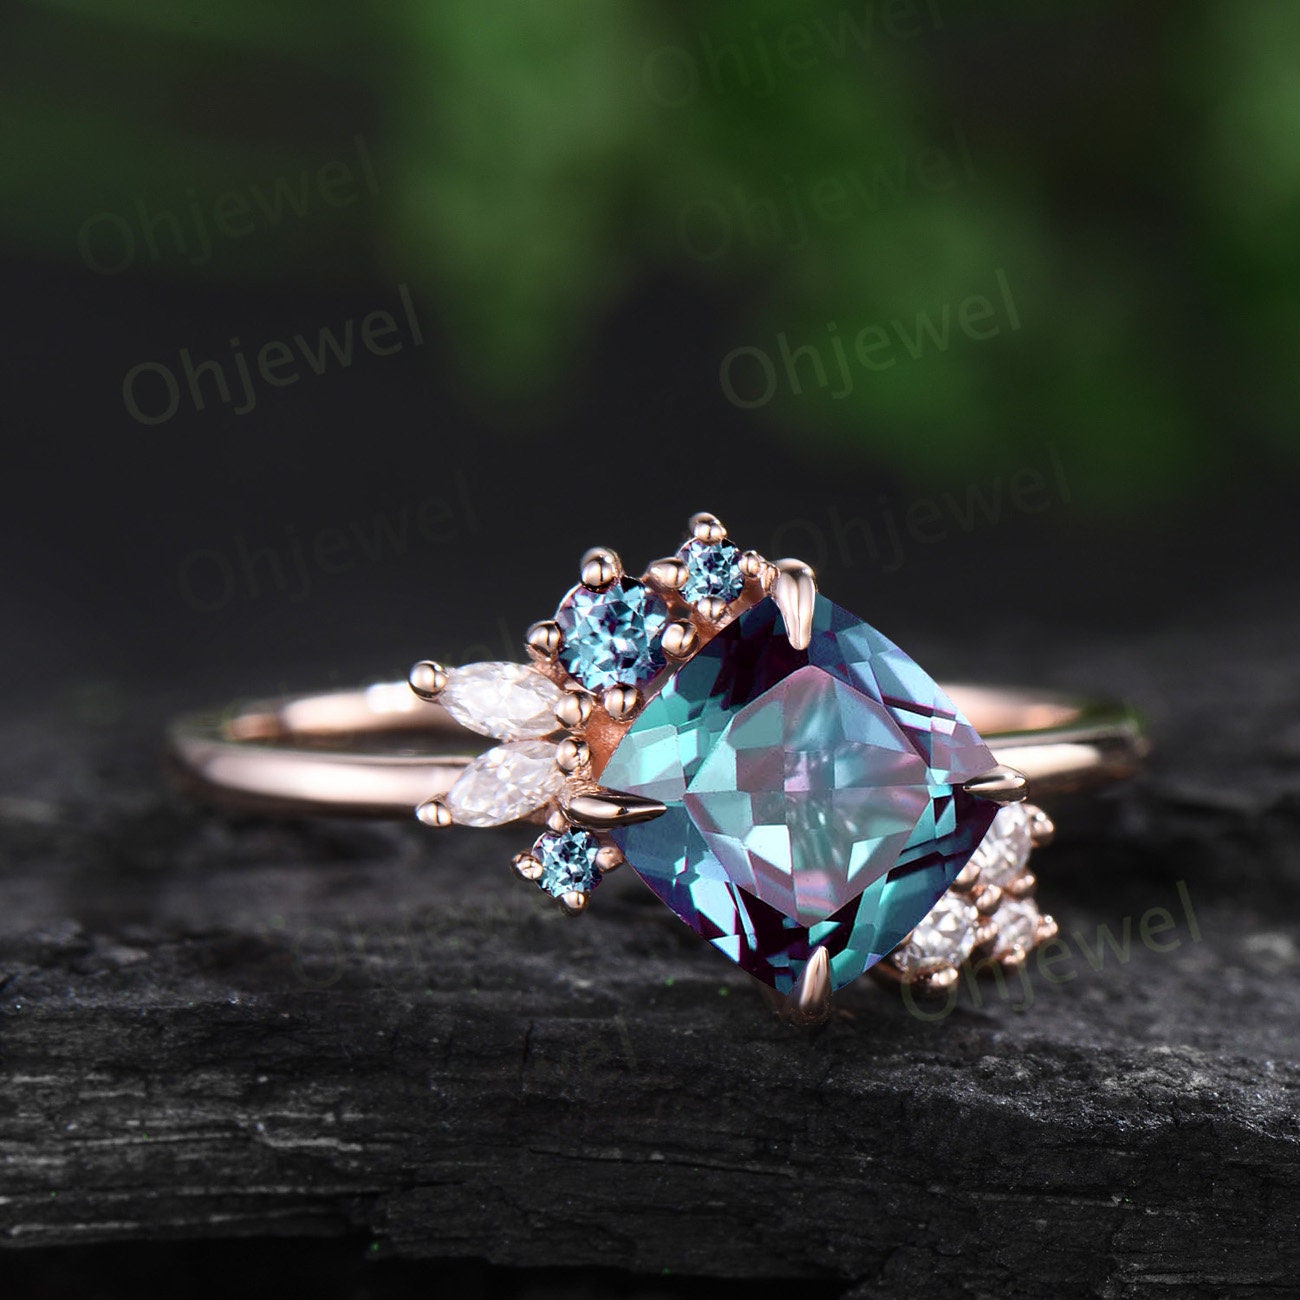 Vintage cushion cut Alexandrite engagement ring 14k rose gold snowdrift cluster diamond ring women unique wedding promise ring gift jewelry